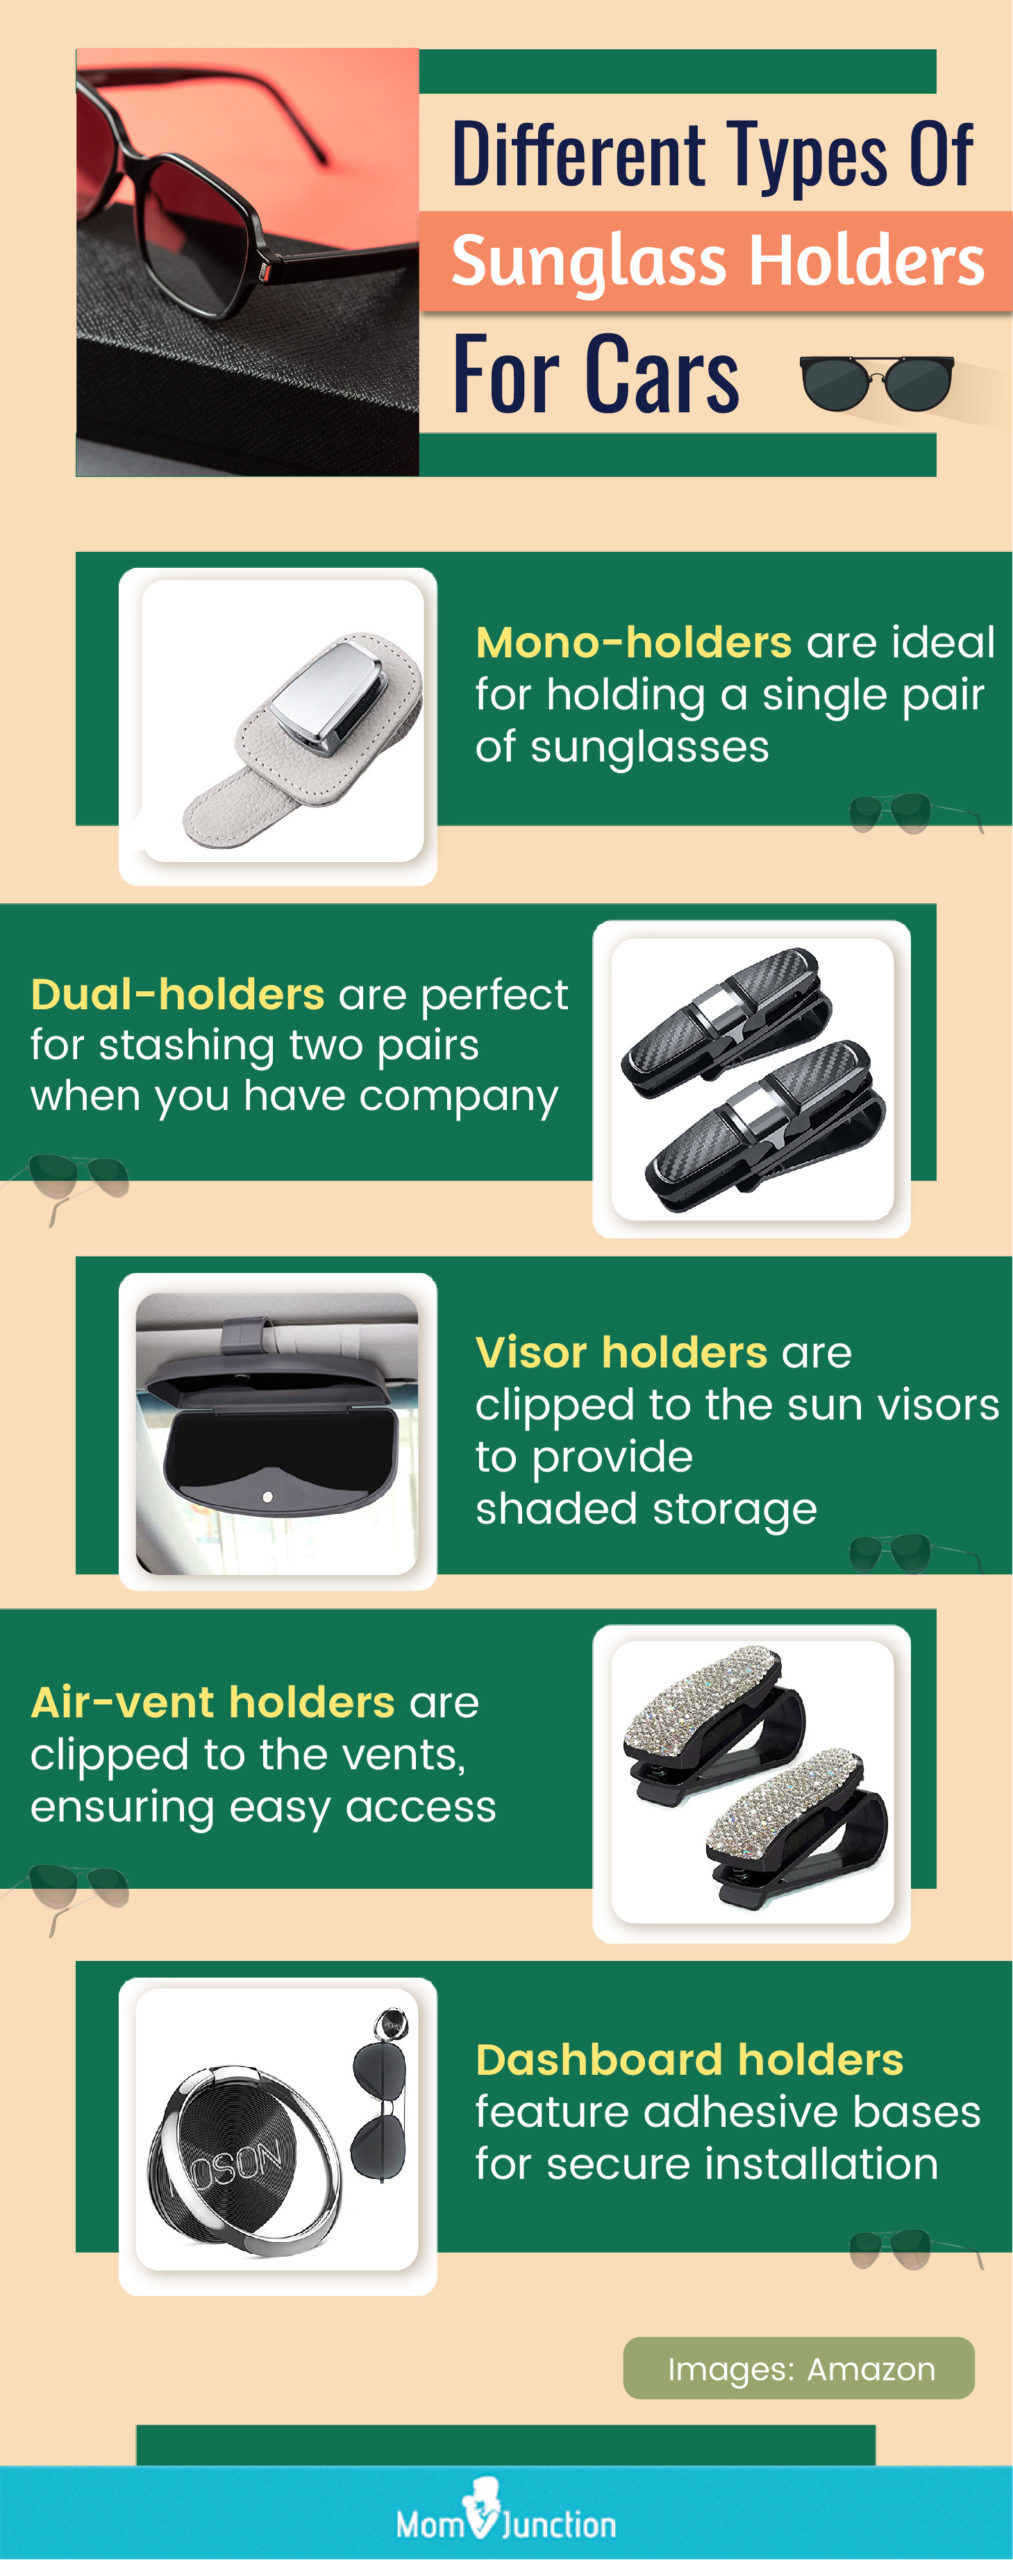 Different Types Of Sunglass Holders For Cars (infographic)